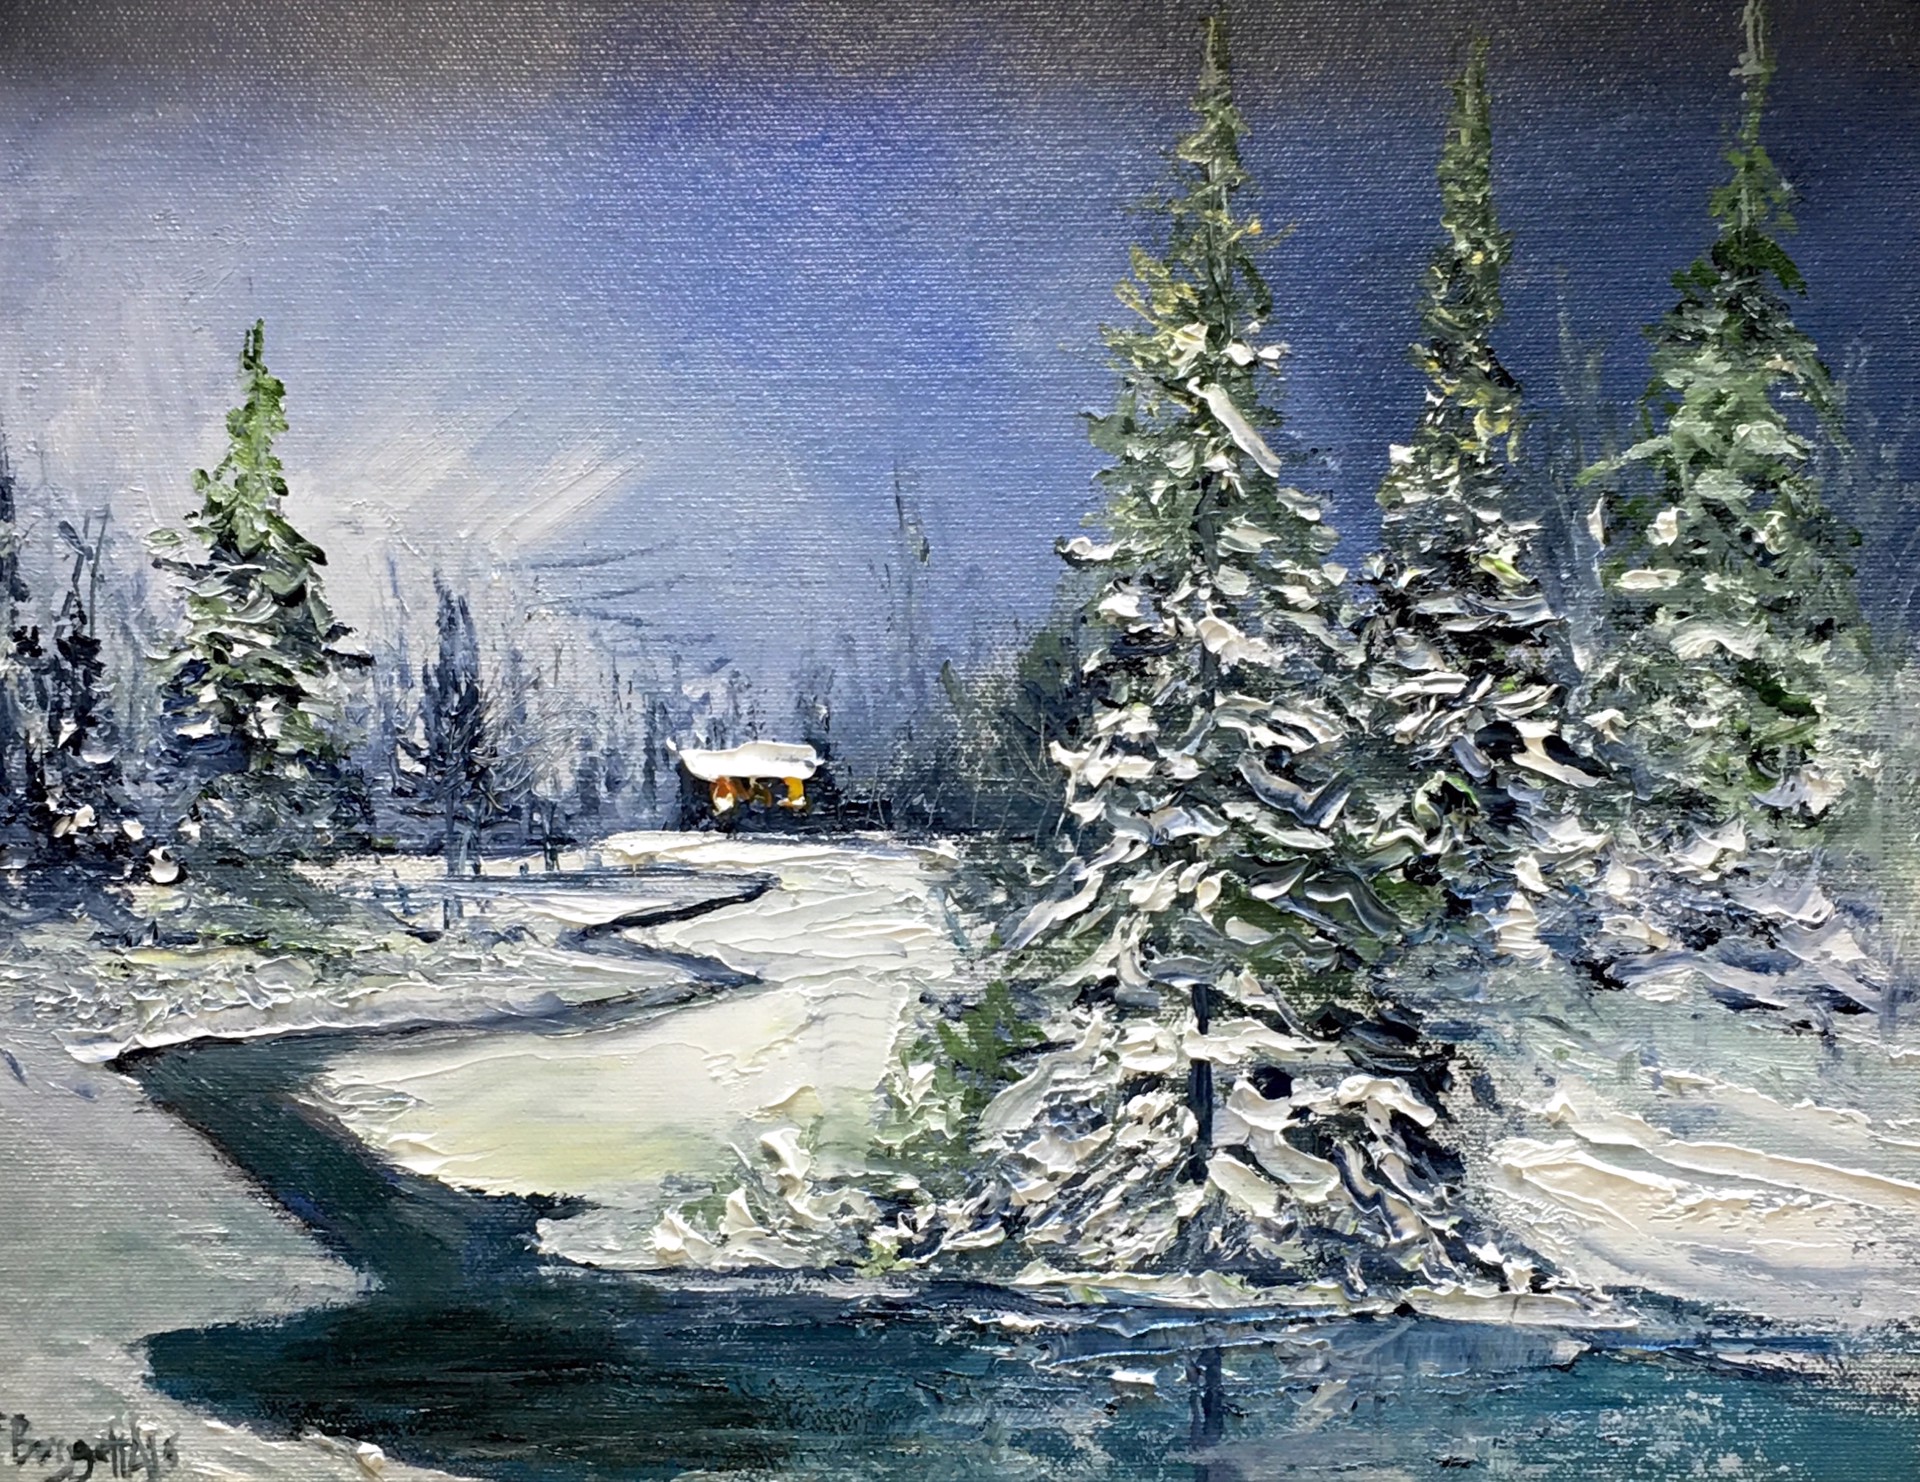 Christmas at the Cabin by Frank Baggett